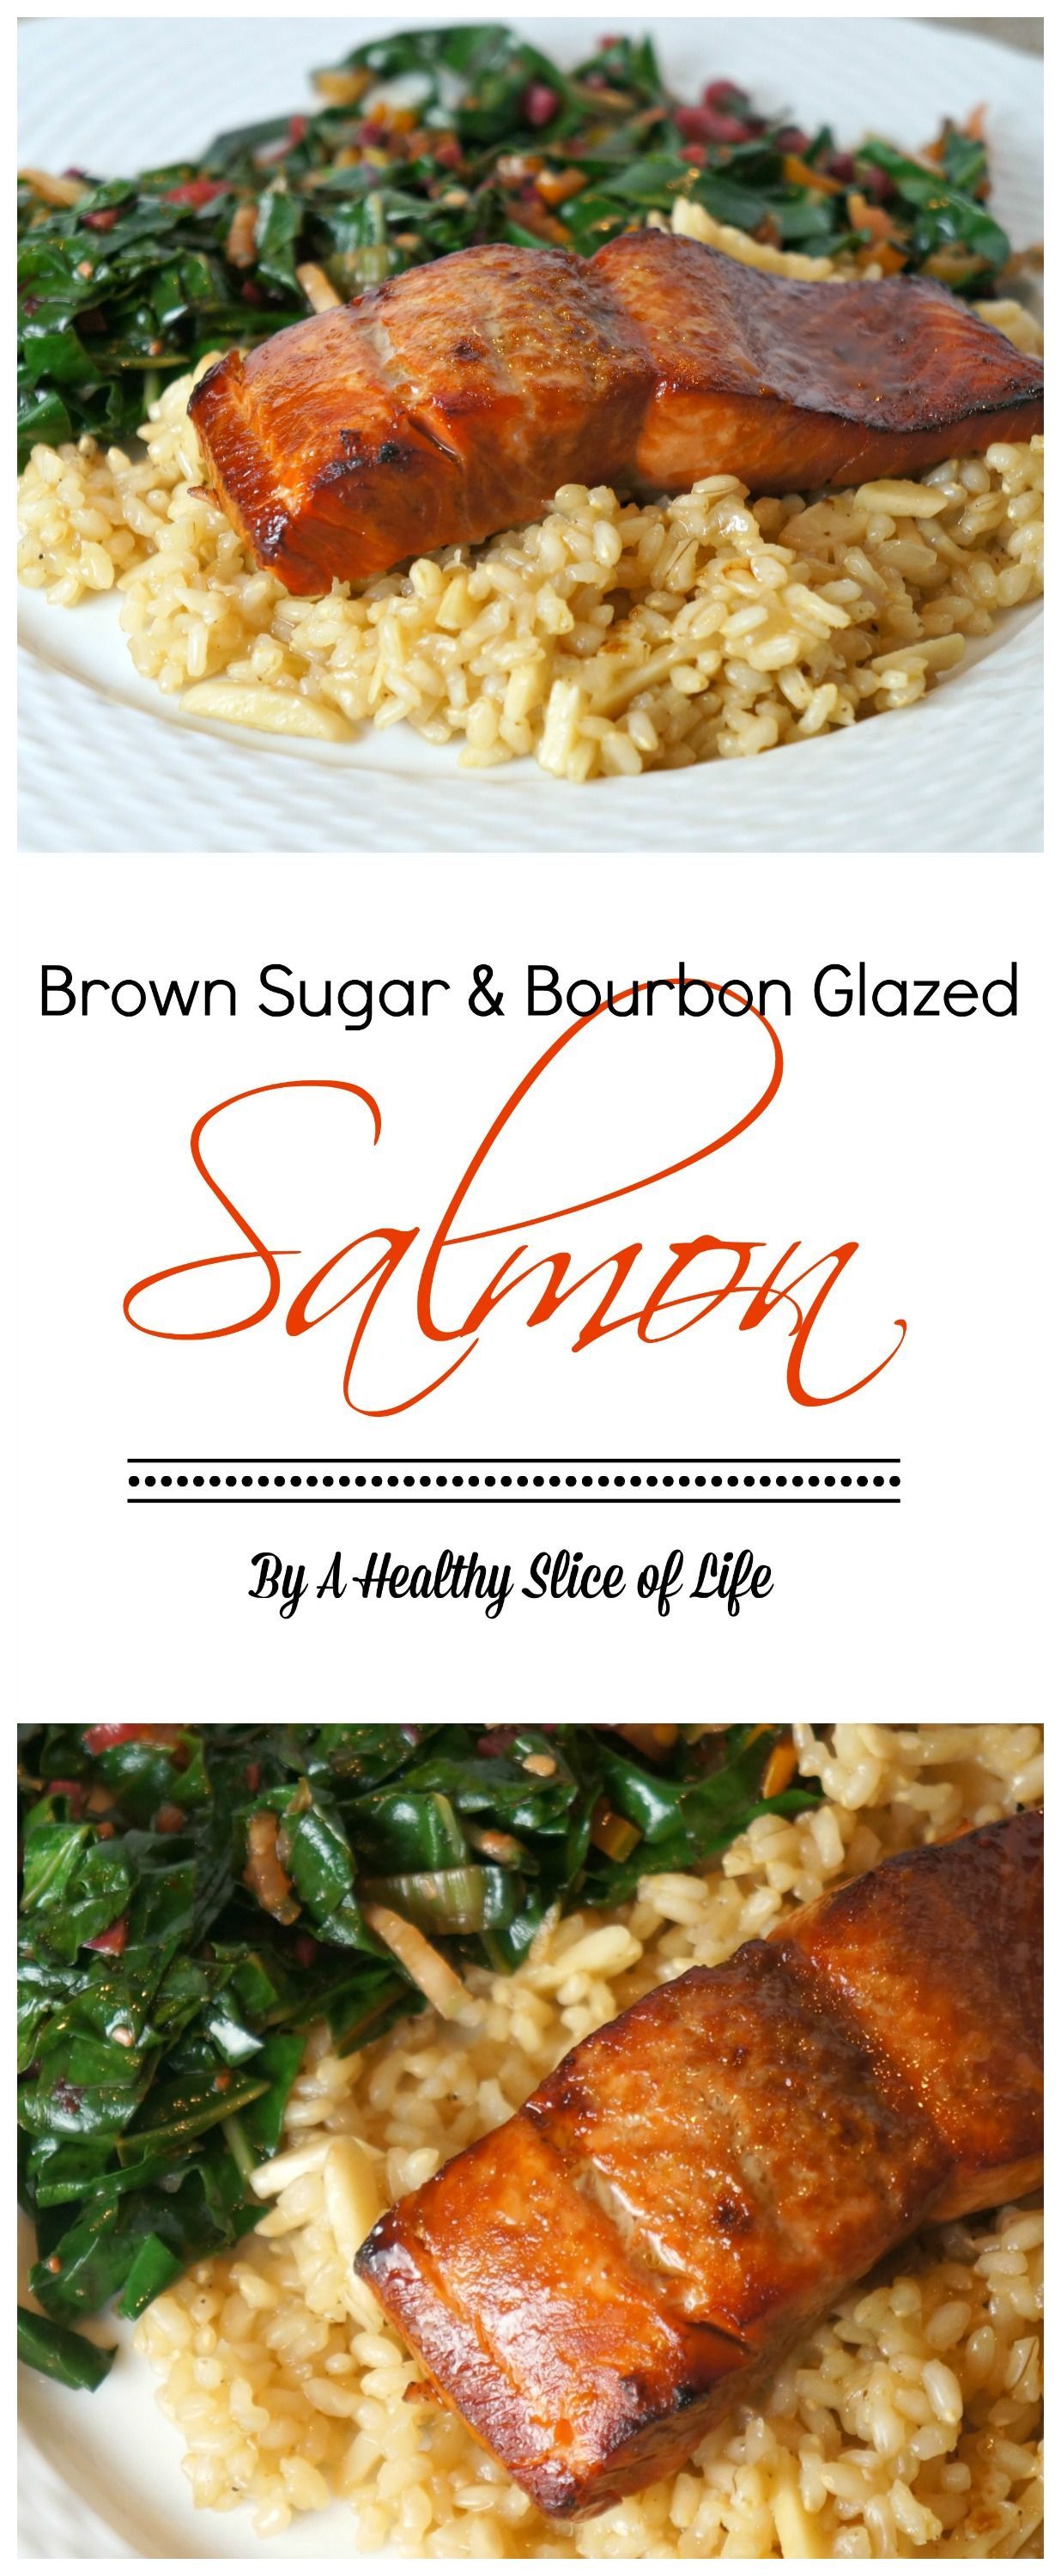 brown sugar and bourbon glazed salmon- quick and foolproof – delicious!